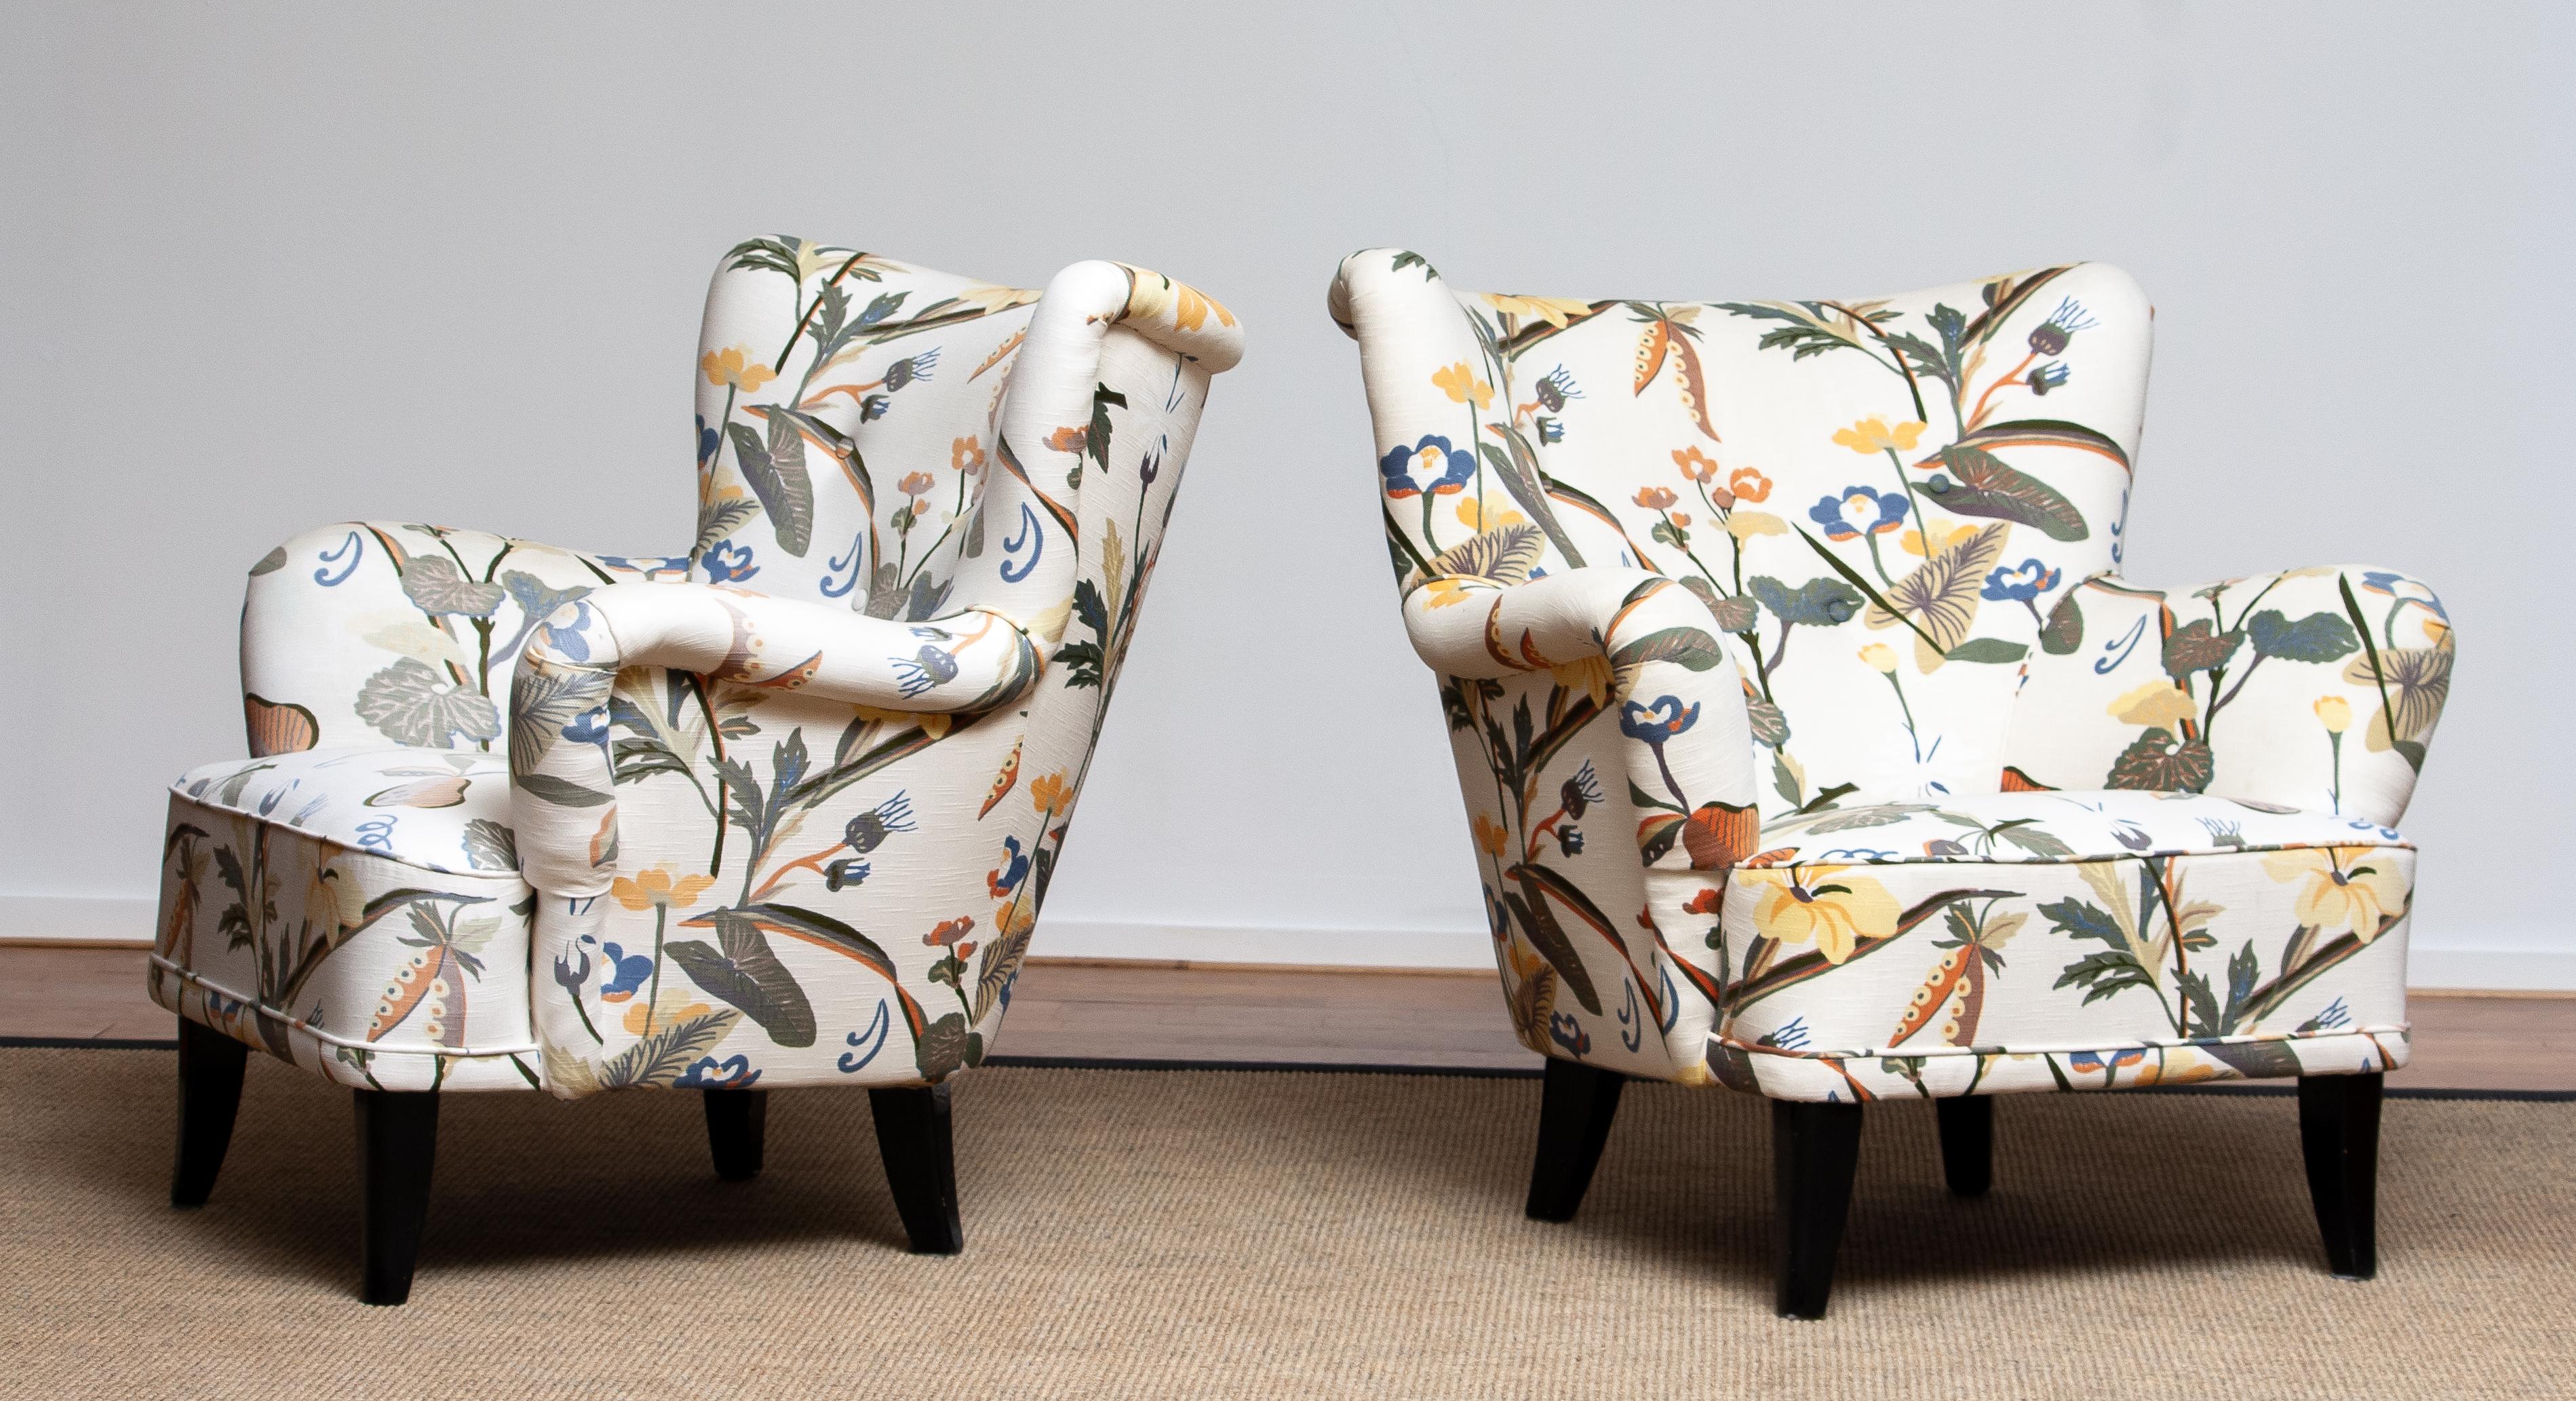 Set of two beautiful 1940s-1950s lounge / club chairs reupholstered, in a later period, with the typical floral print fabric designed by Josef Frank.
The chairs are designed by Ilmari Lappalainen for Asko in Finland
The overall condition is good.